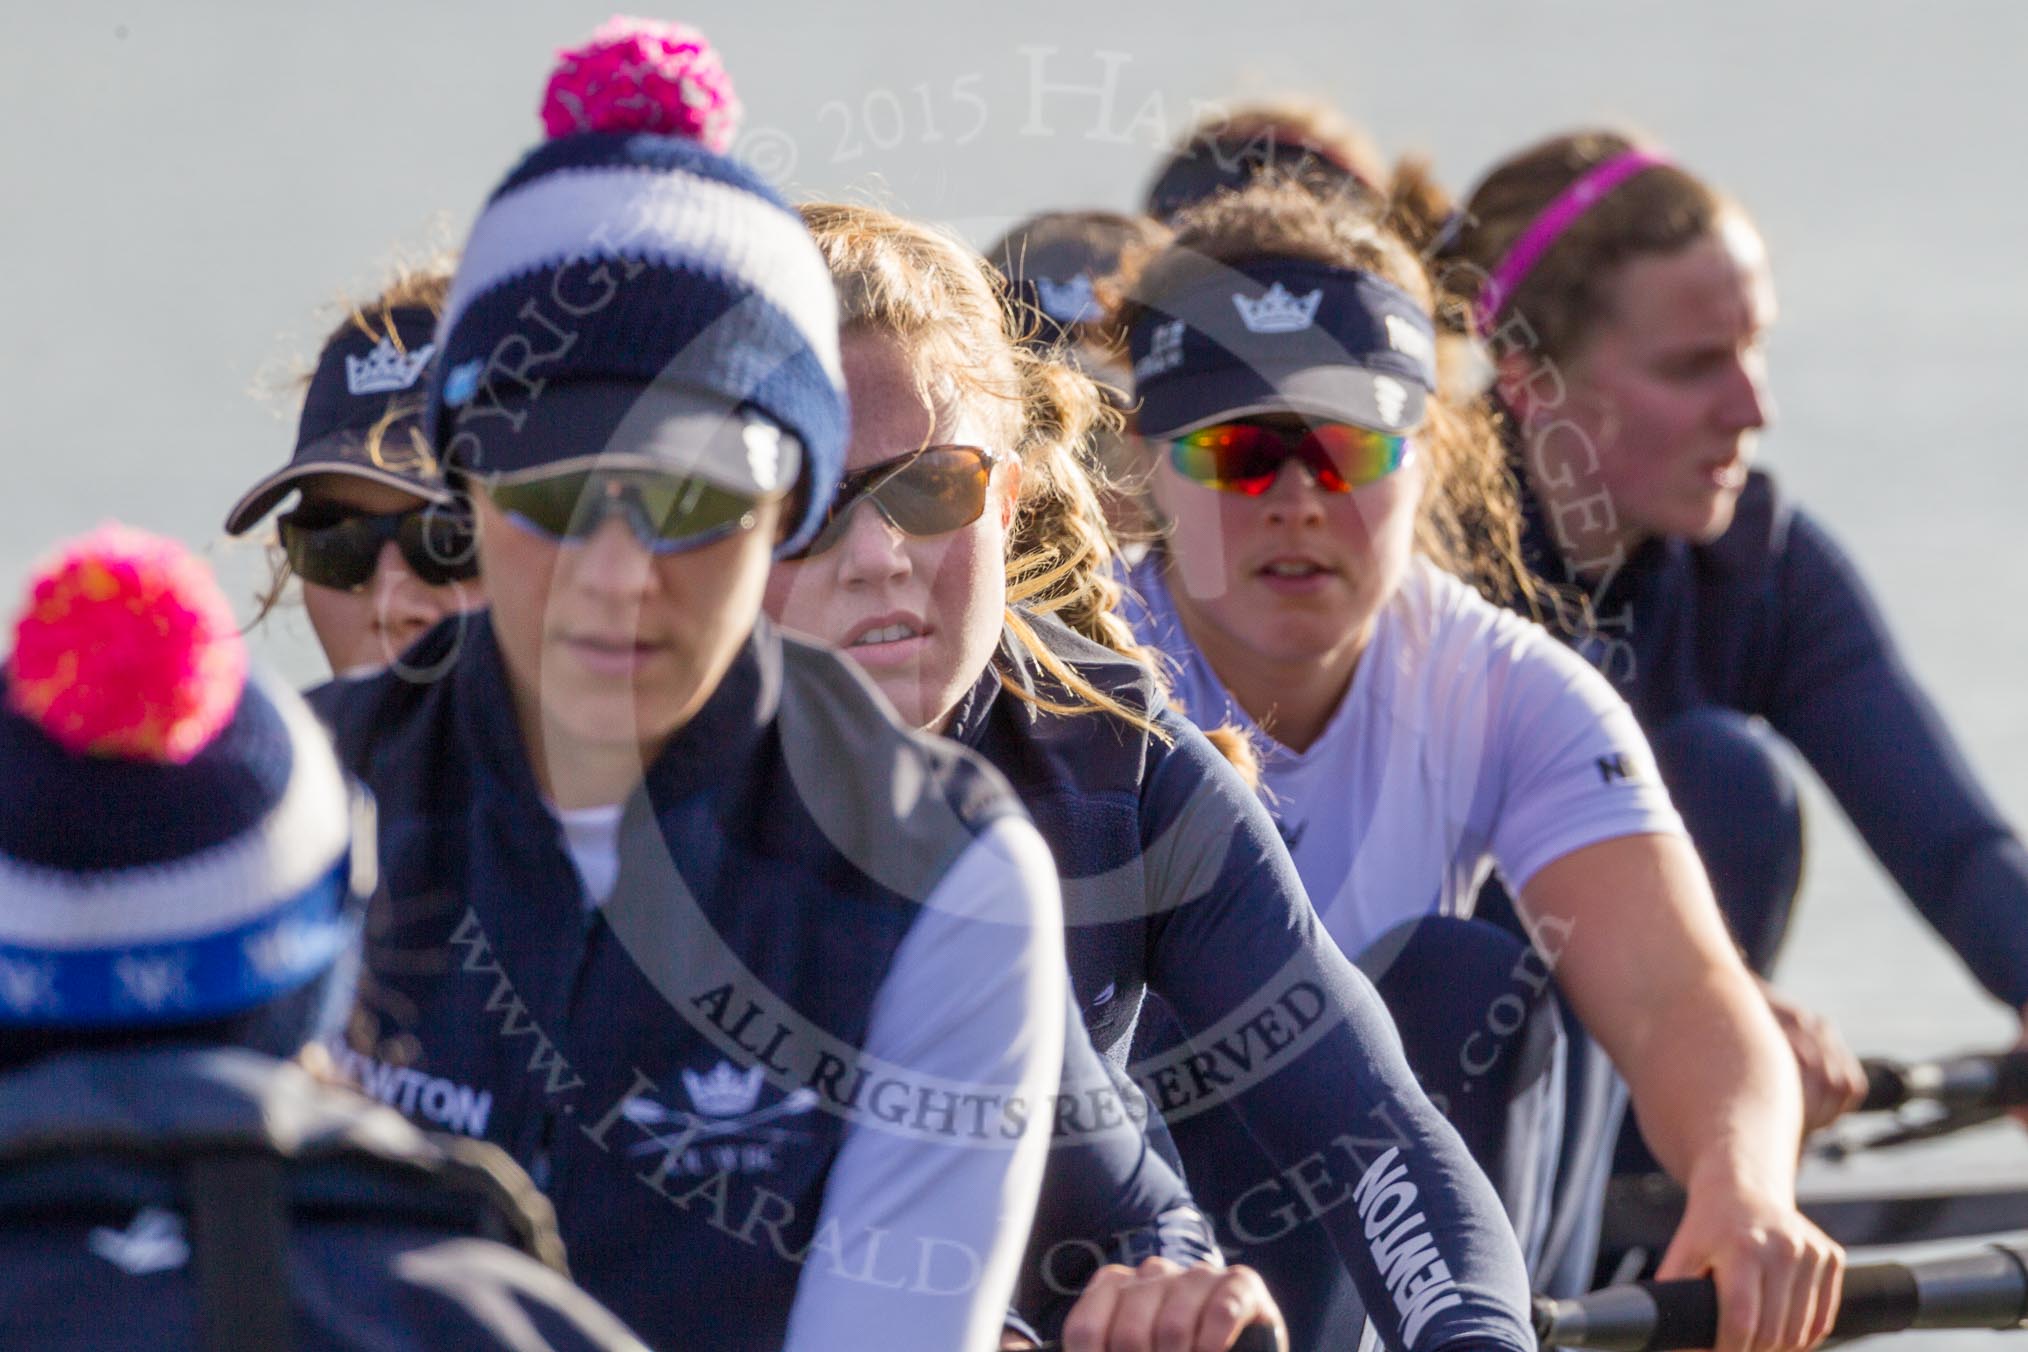 The Boat Race season 2015: OUWBC training Wallingford.

Wallingford,

United Kingdom,
on 04 March 2015 at 15:37, image #29